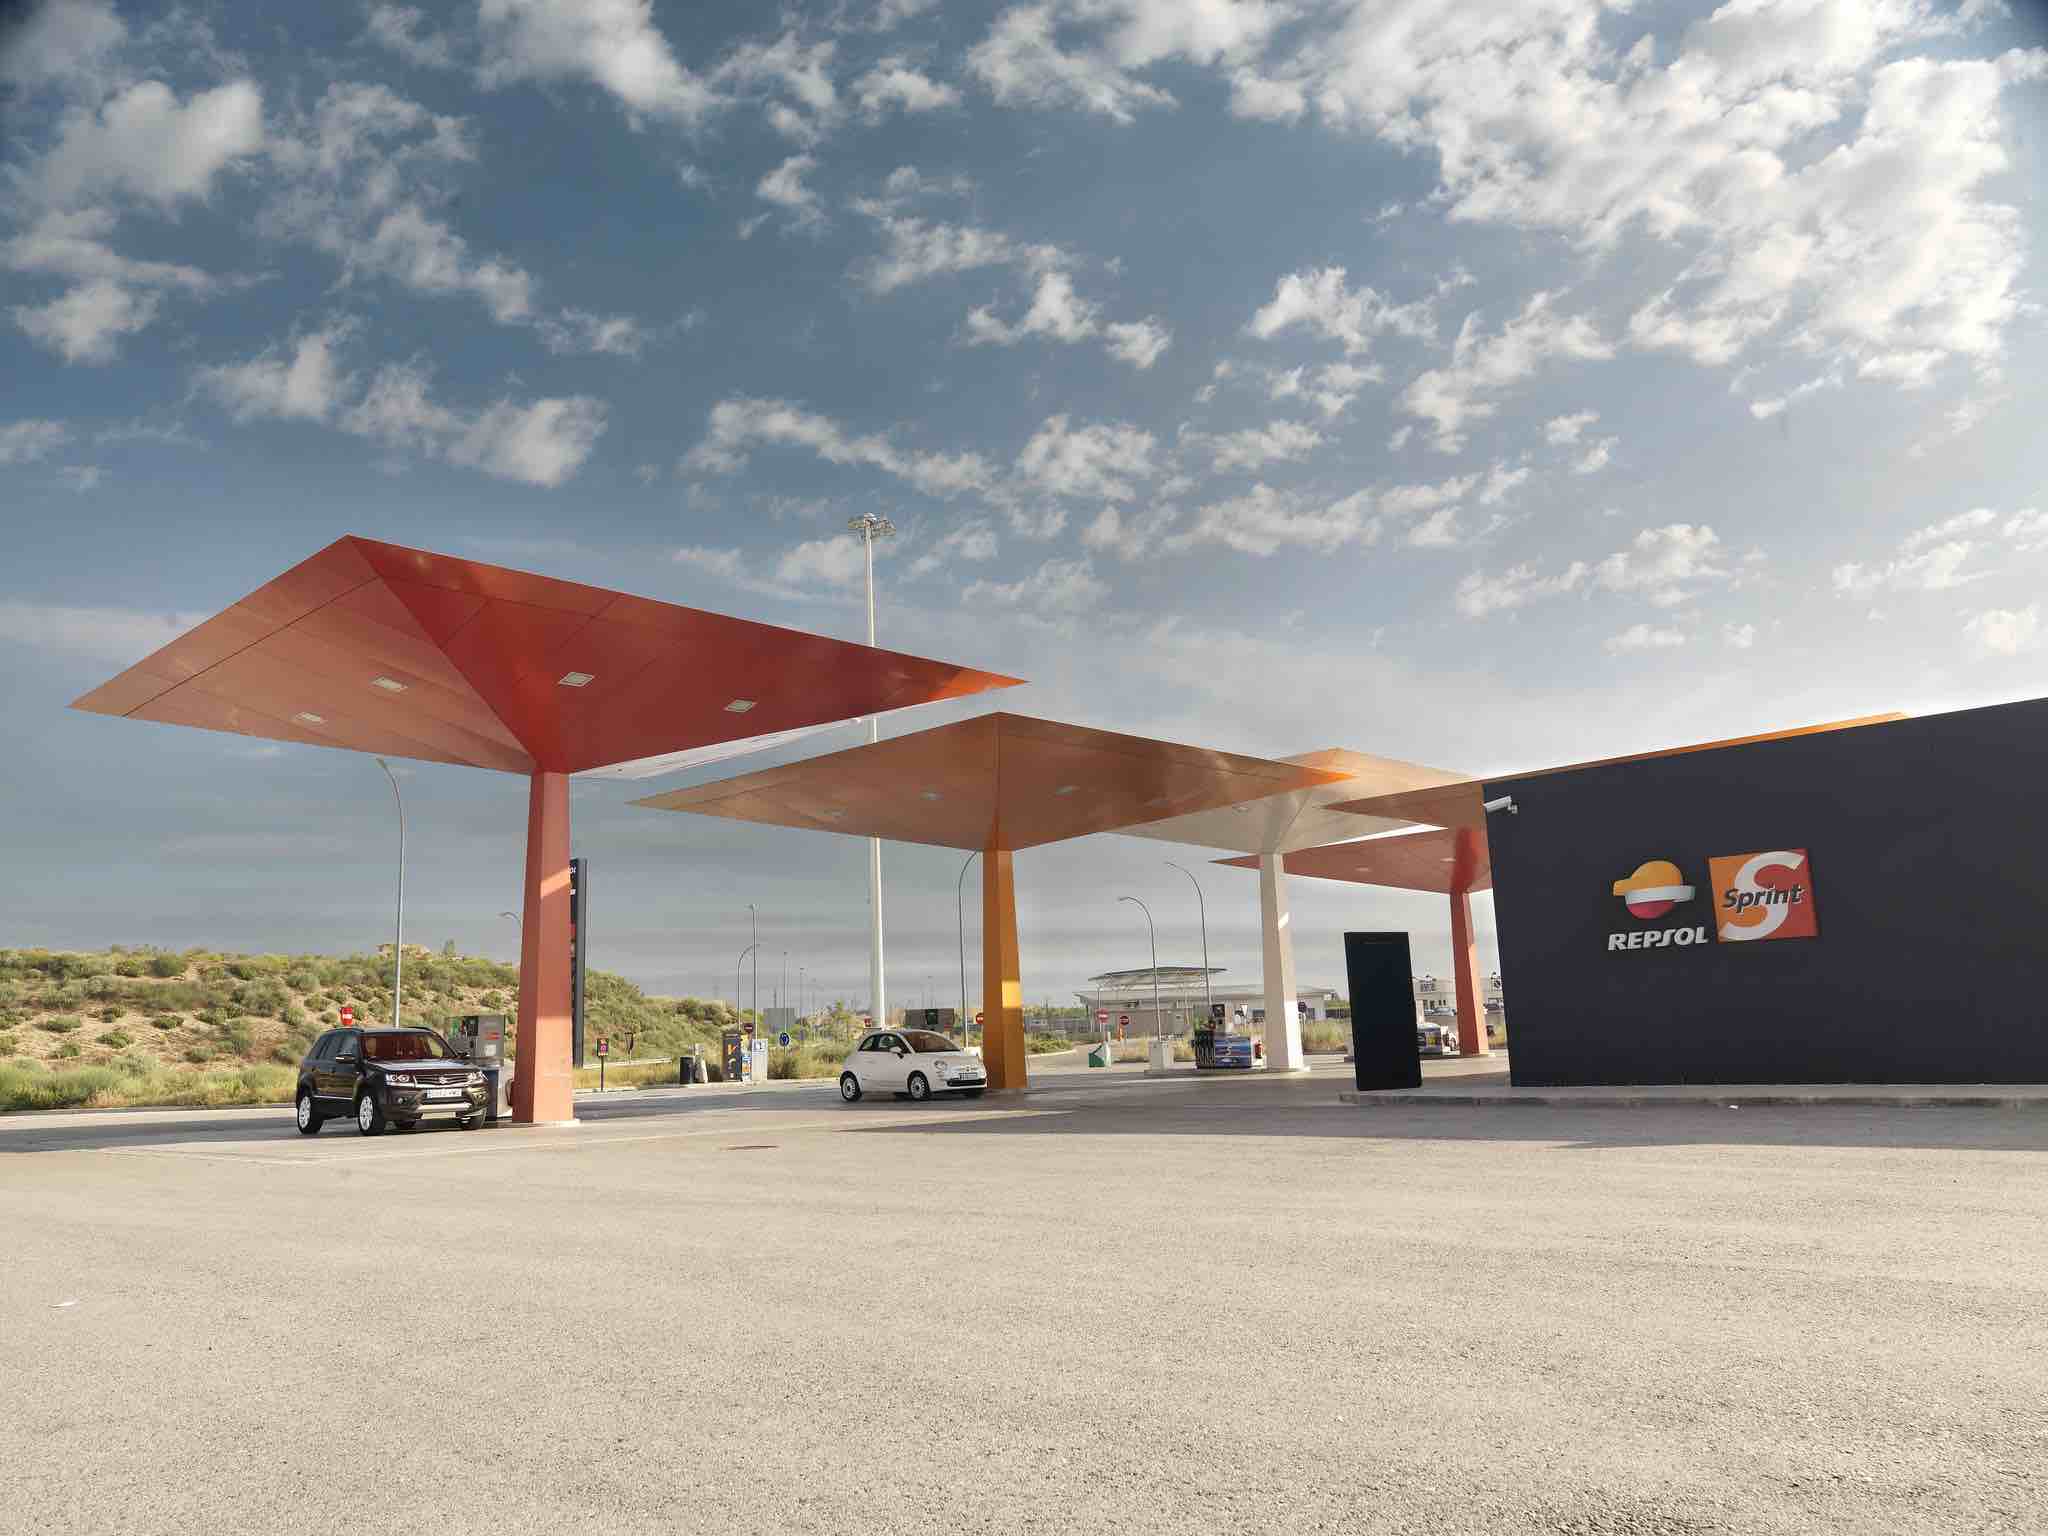 600 gas stations offering renewable fuel – and that’s just this year!